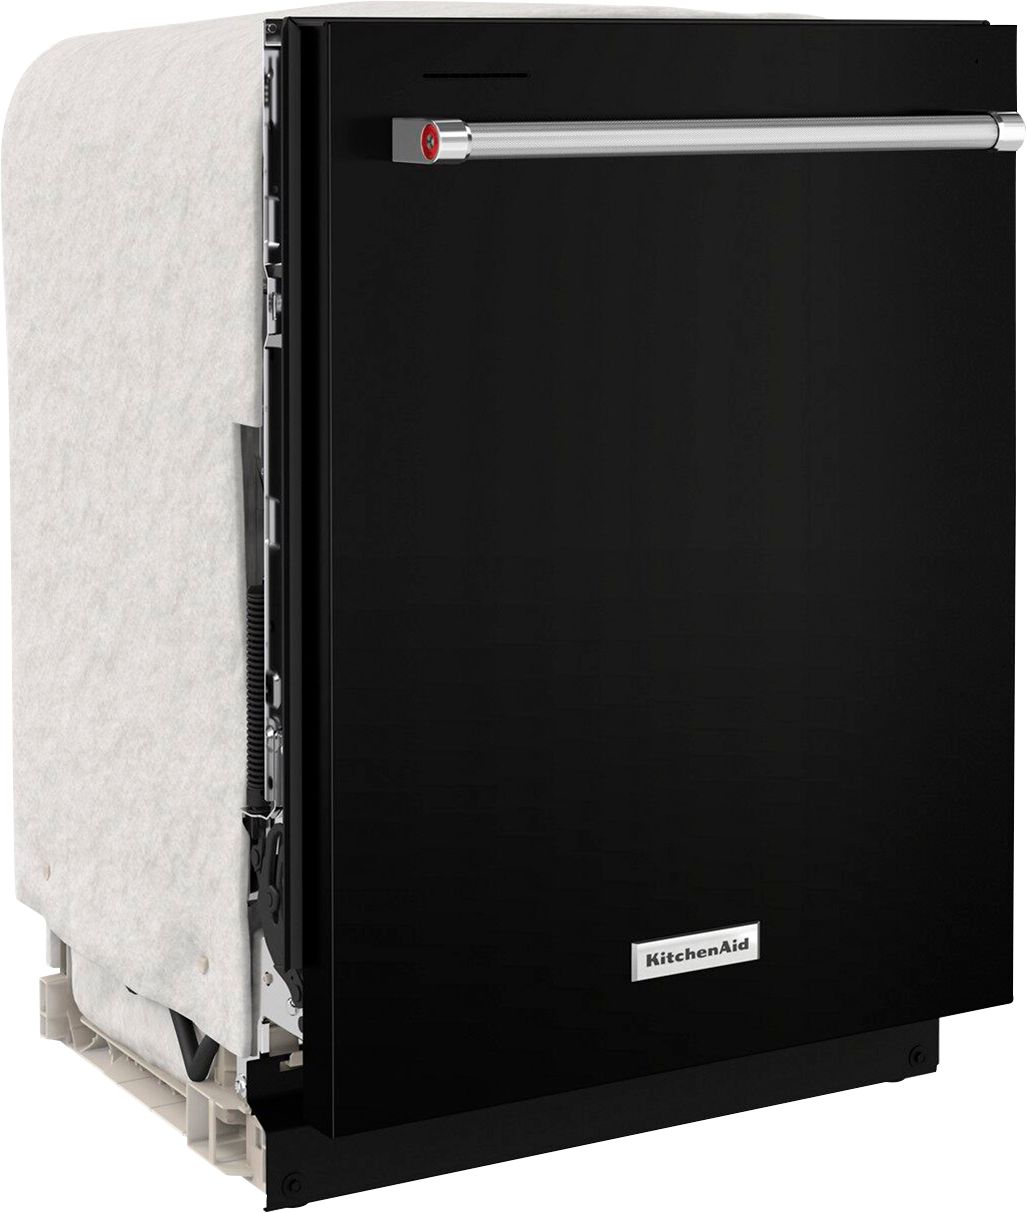 Angle View: KitchenAid - 24" Top Control Built-In Dishwasher with Stainless Steel Tub, ProWash Cycle, 3rd Rack, 39 dBA - Black